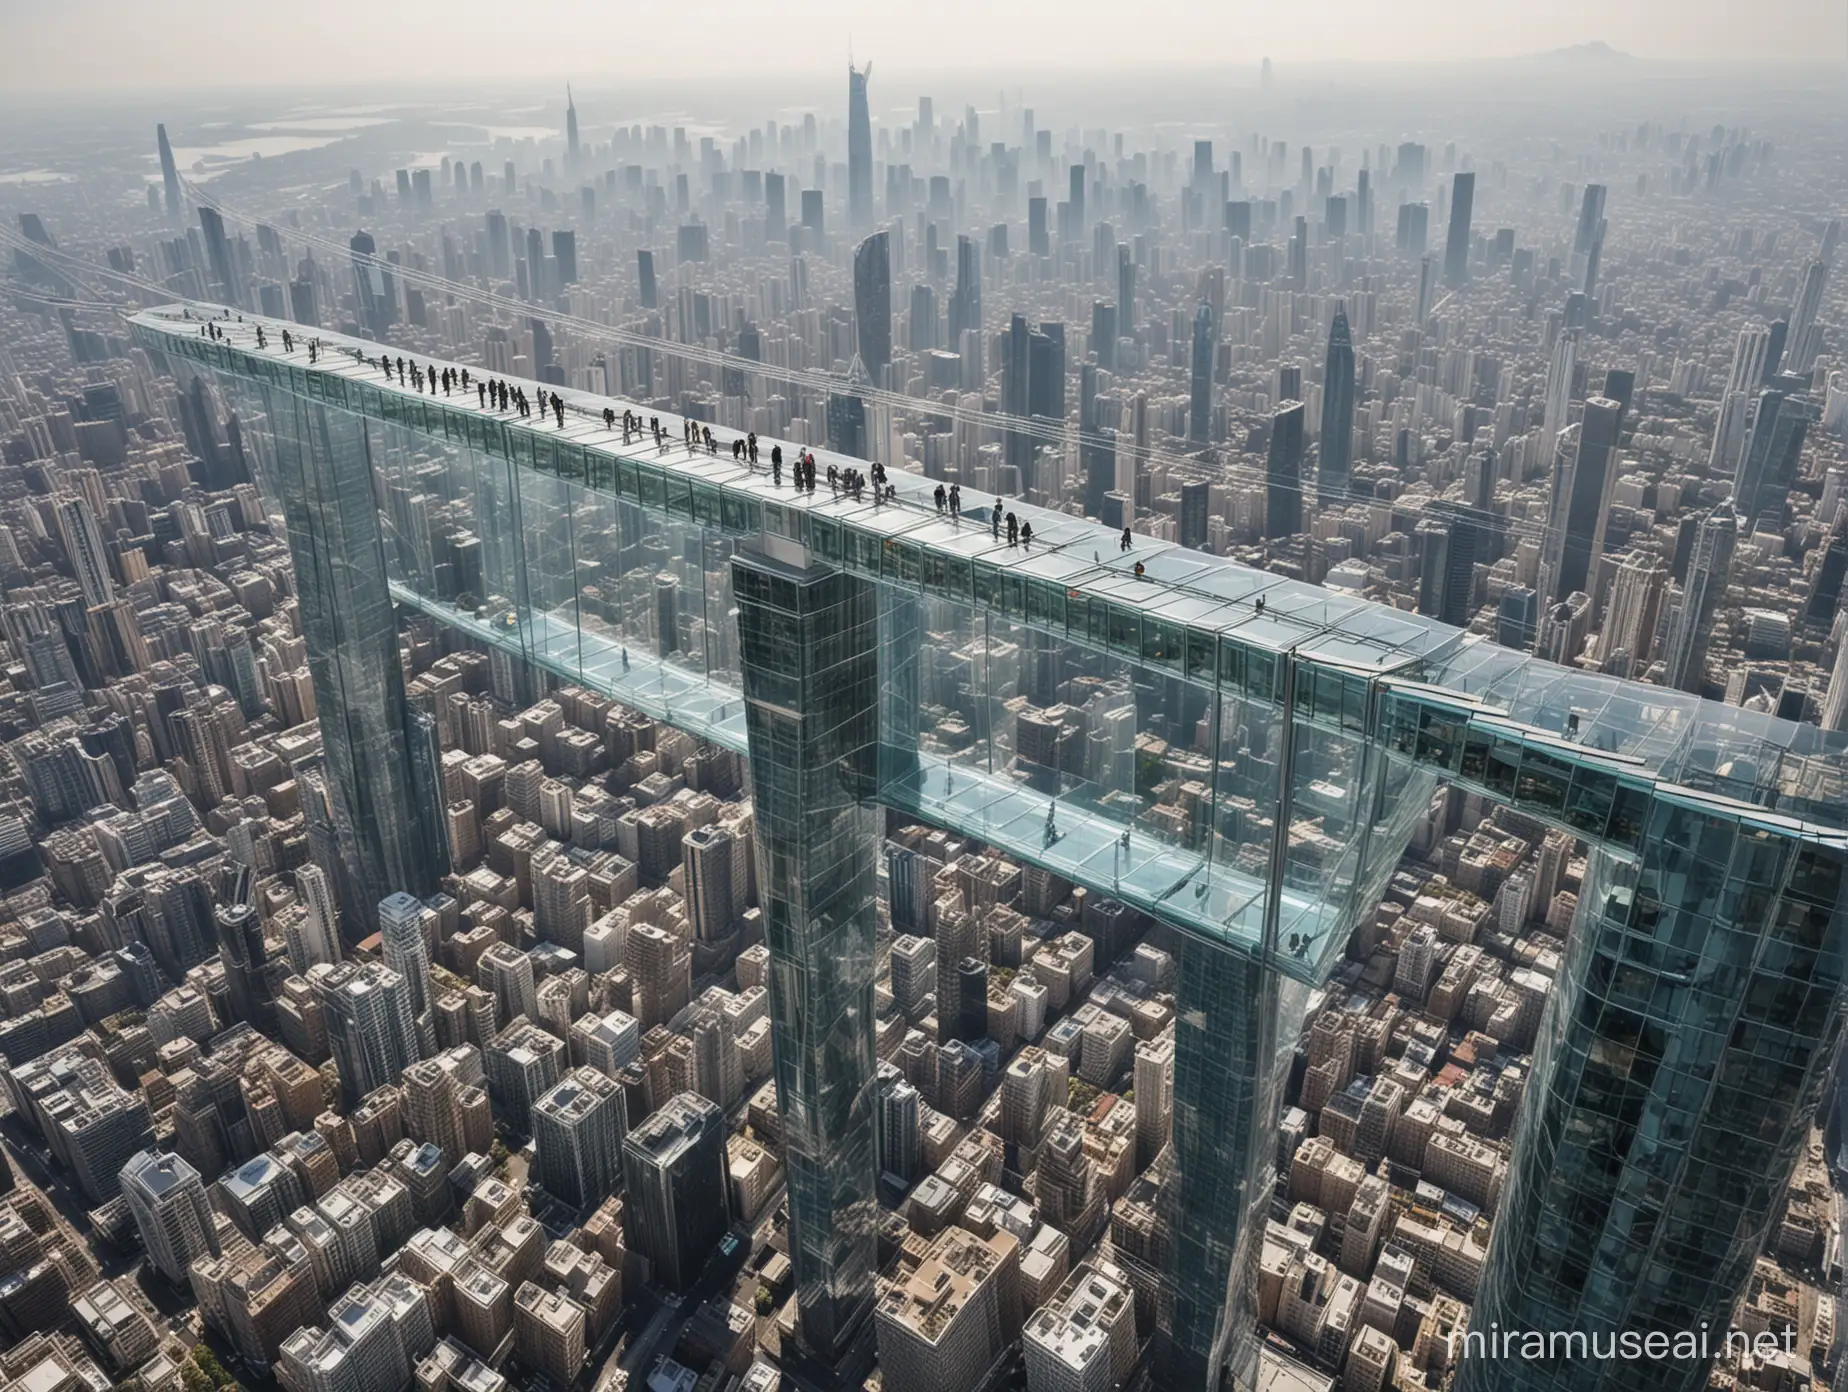 curate a skybridge, connecting tall buildings of height 1 kilometer, in the year 2124, glass material, capsule shaped